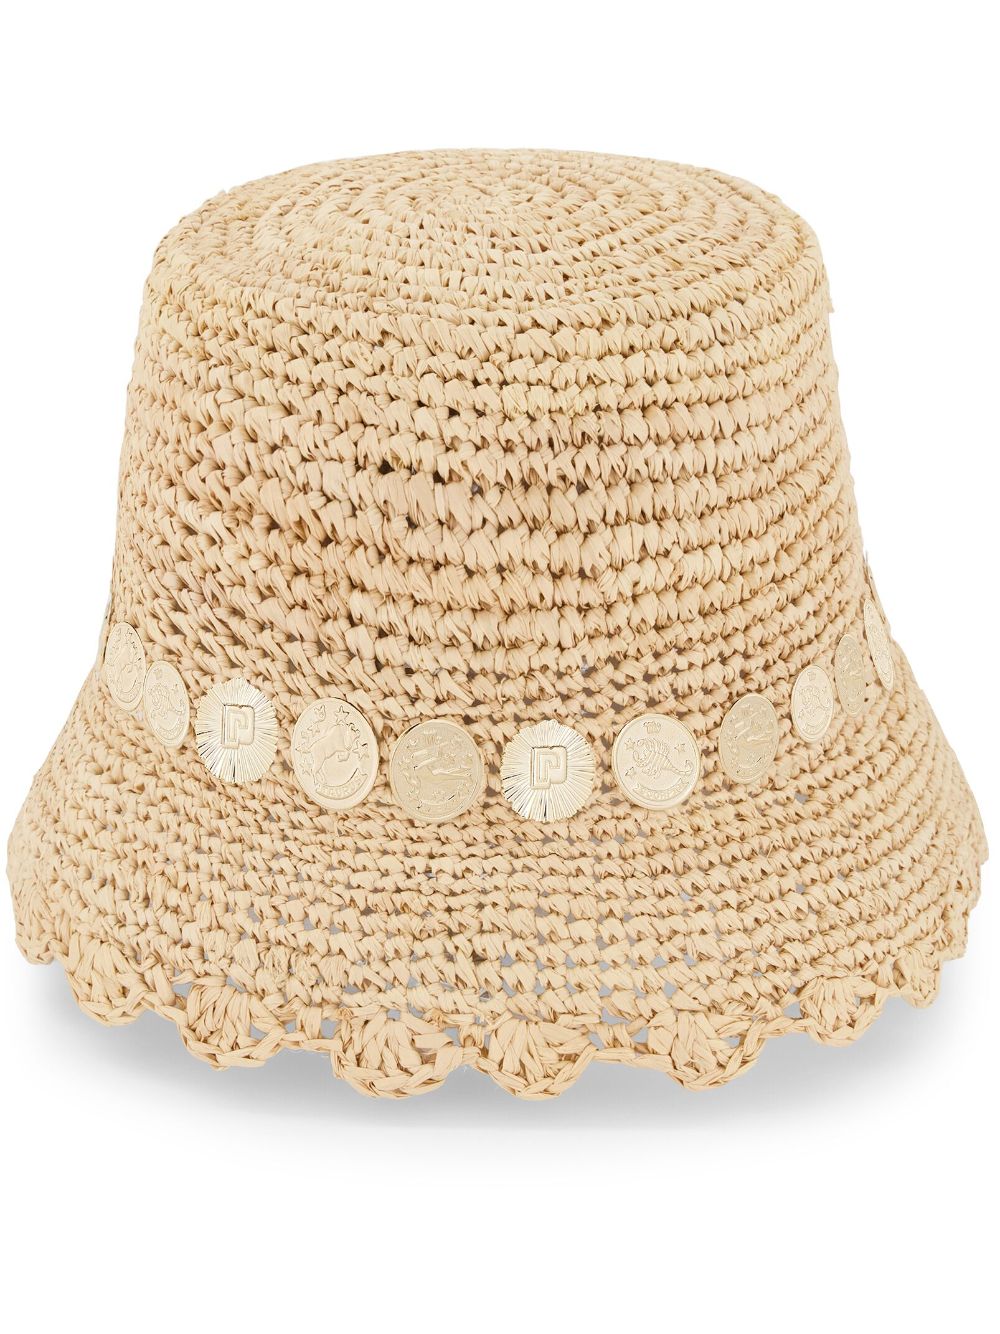 coin-embellished woven hat